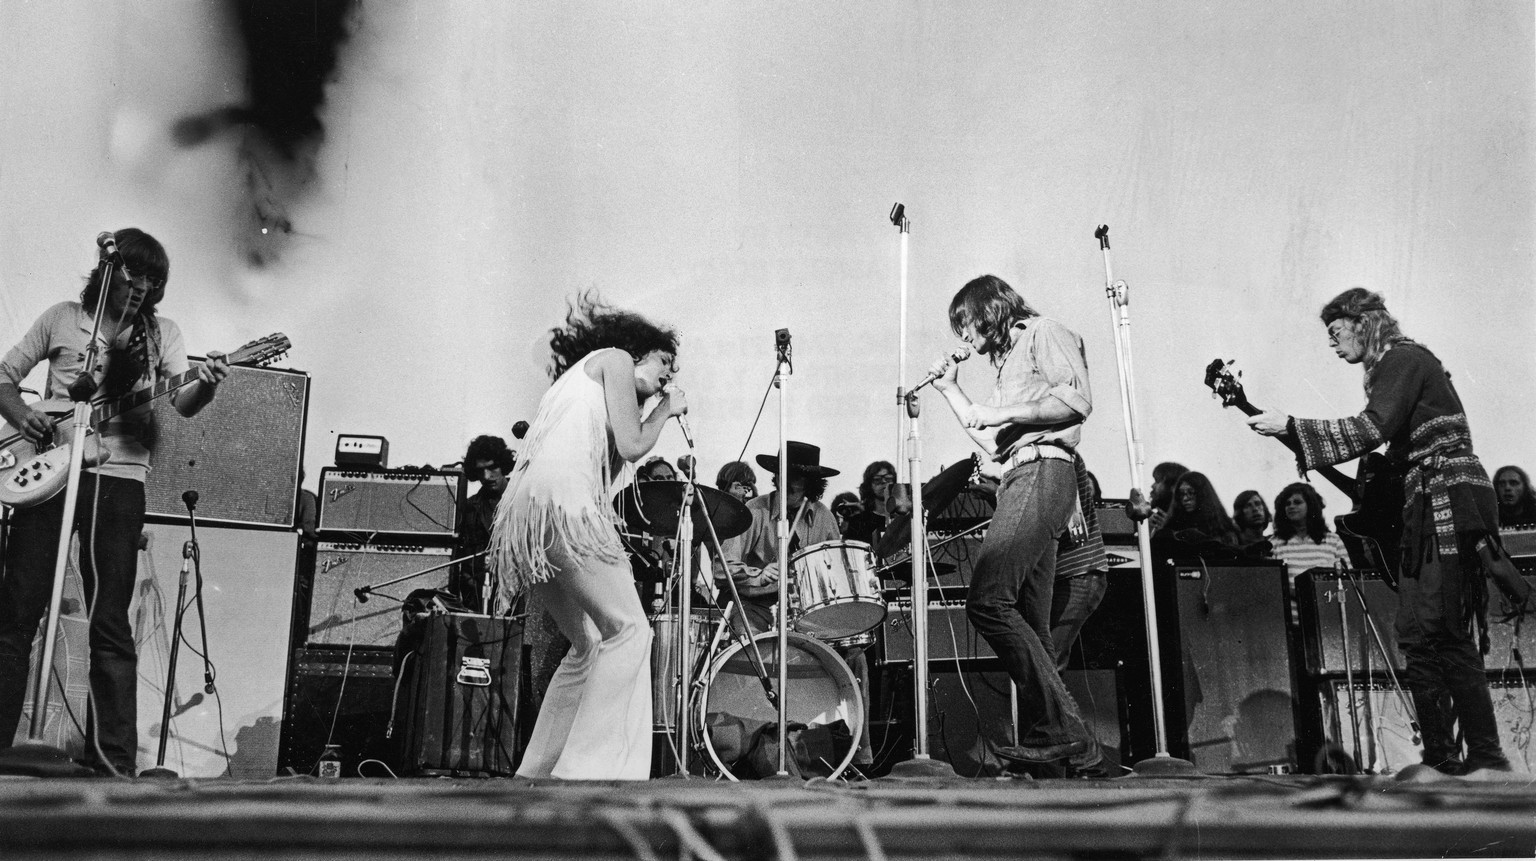 1969, Singer Grace Slick performs with the American rock group Jefferson Airplane at Woodstock music festival. (Photo by Getty Images/Getty Images)